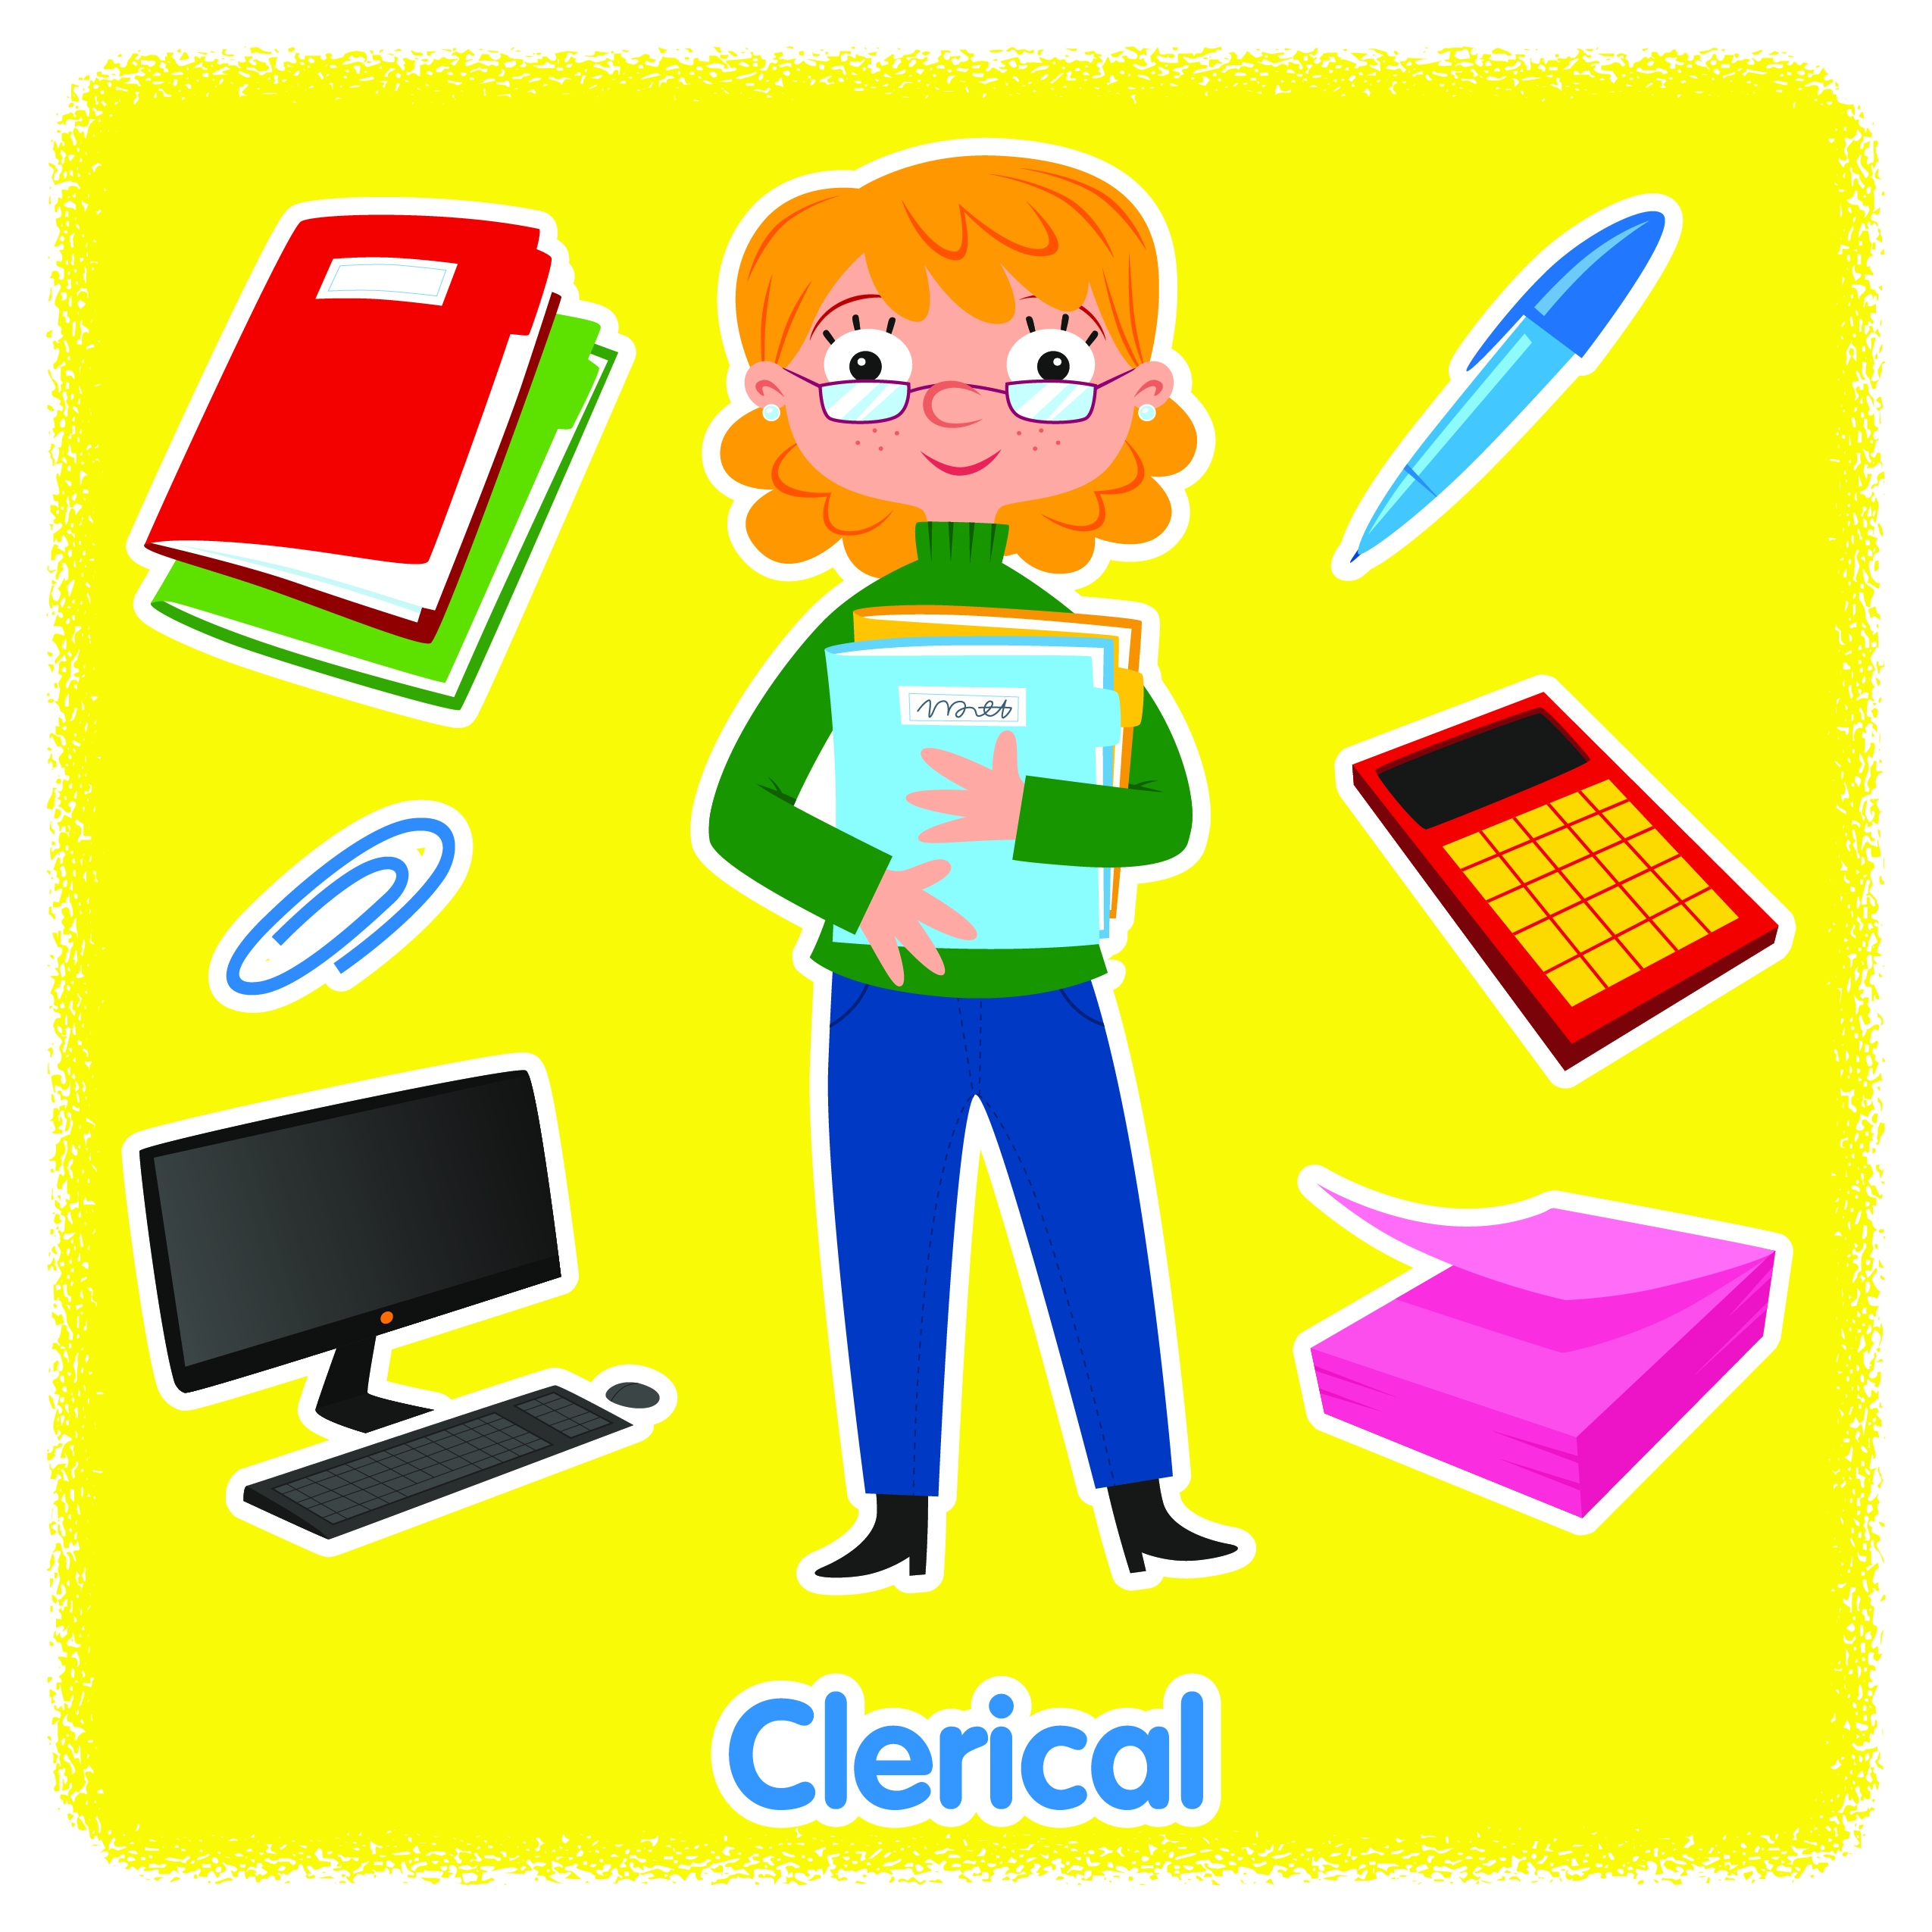 Clerical Meaning and Definition